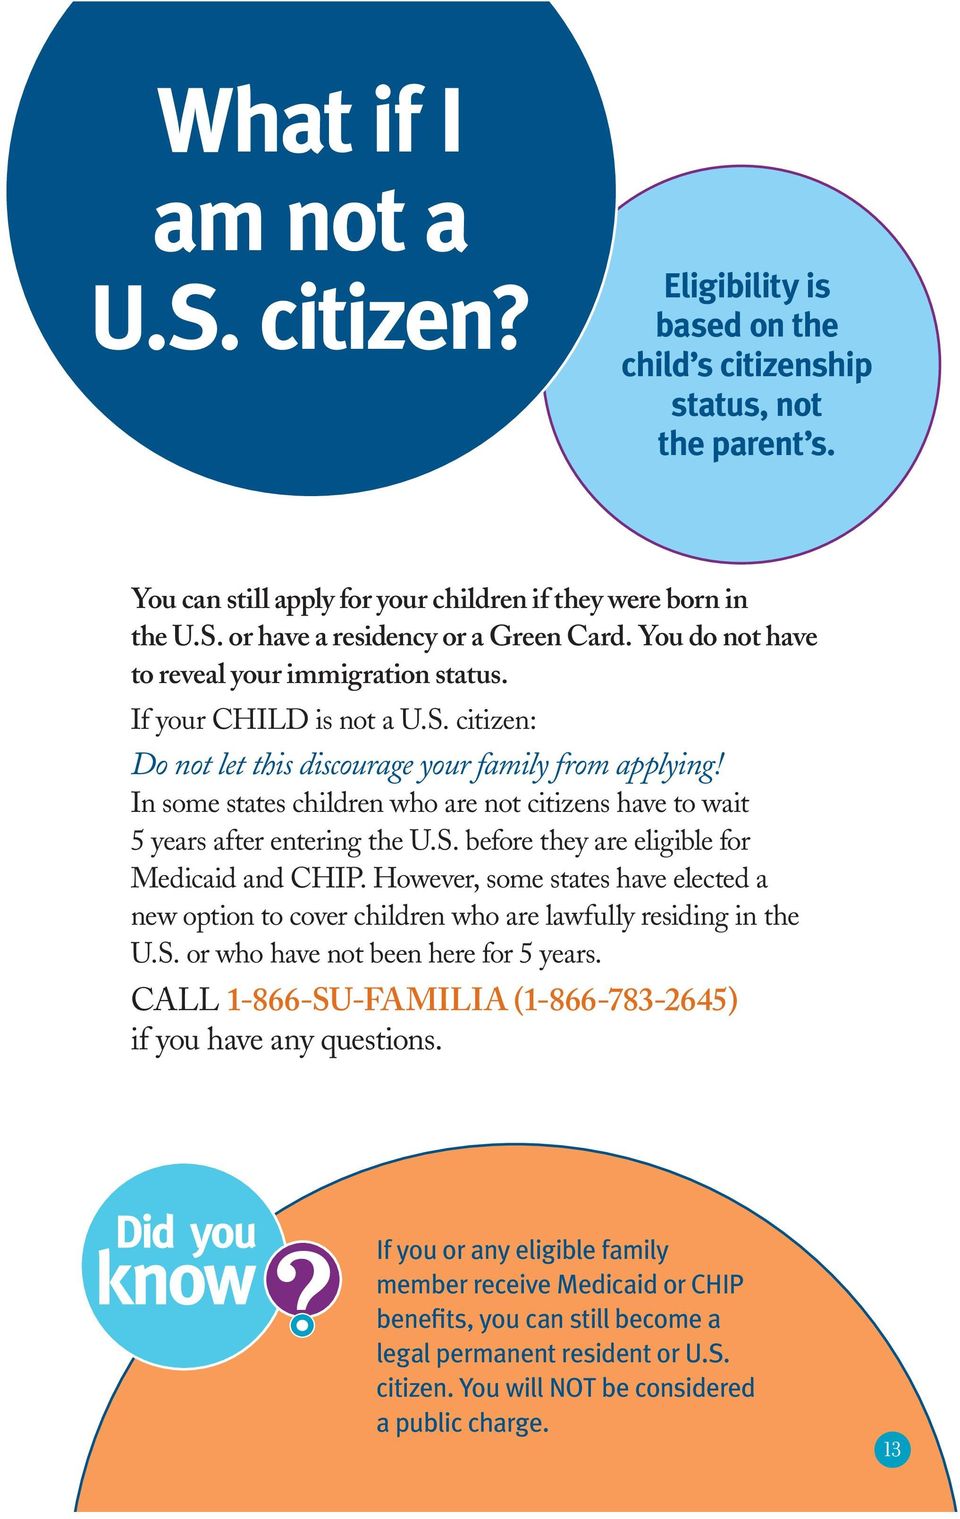 In some states children who are not citizens have to wait 5 years after entering the U.S. before they are eligible for Medicaid and CHIP.